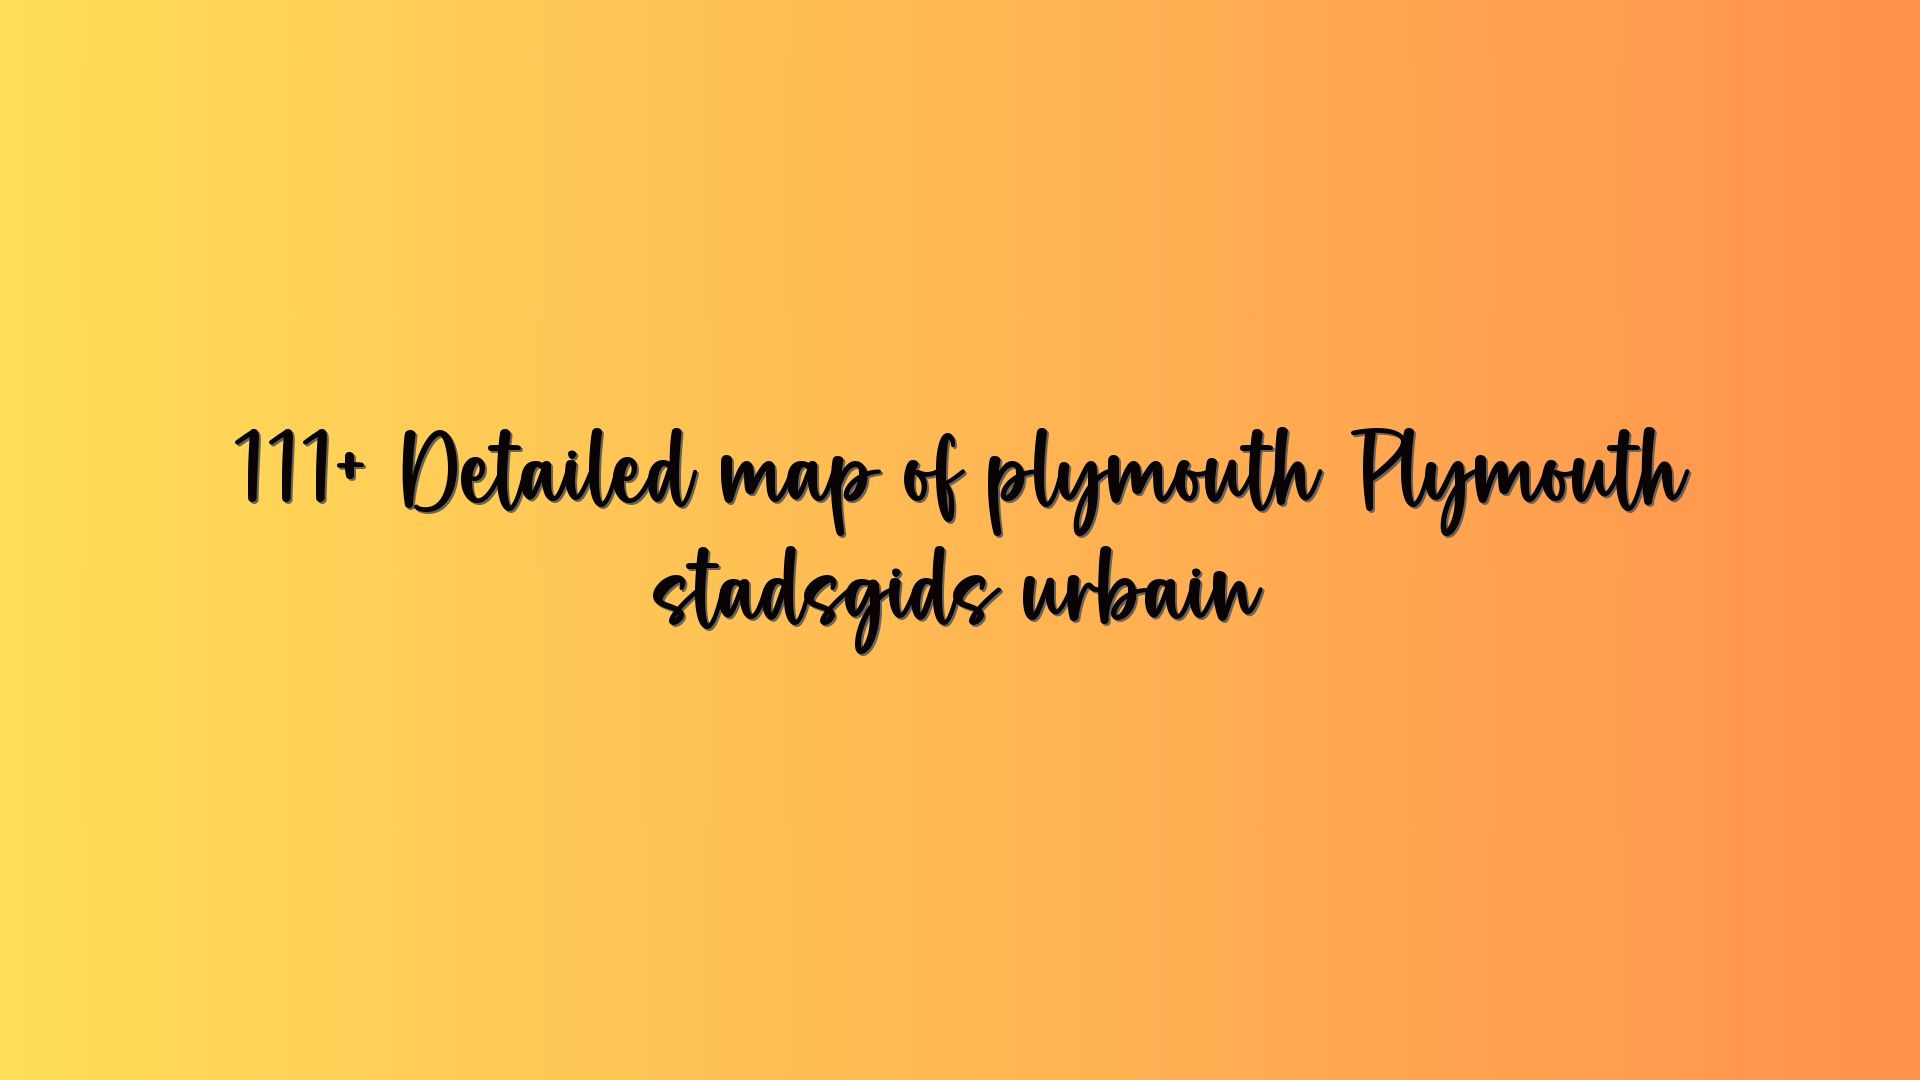 111+ Detailed map of plymouth Plymouth stadsgids urbain